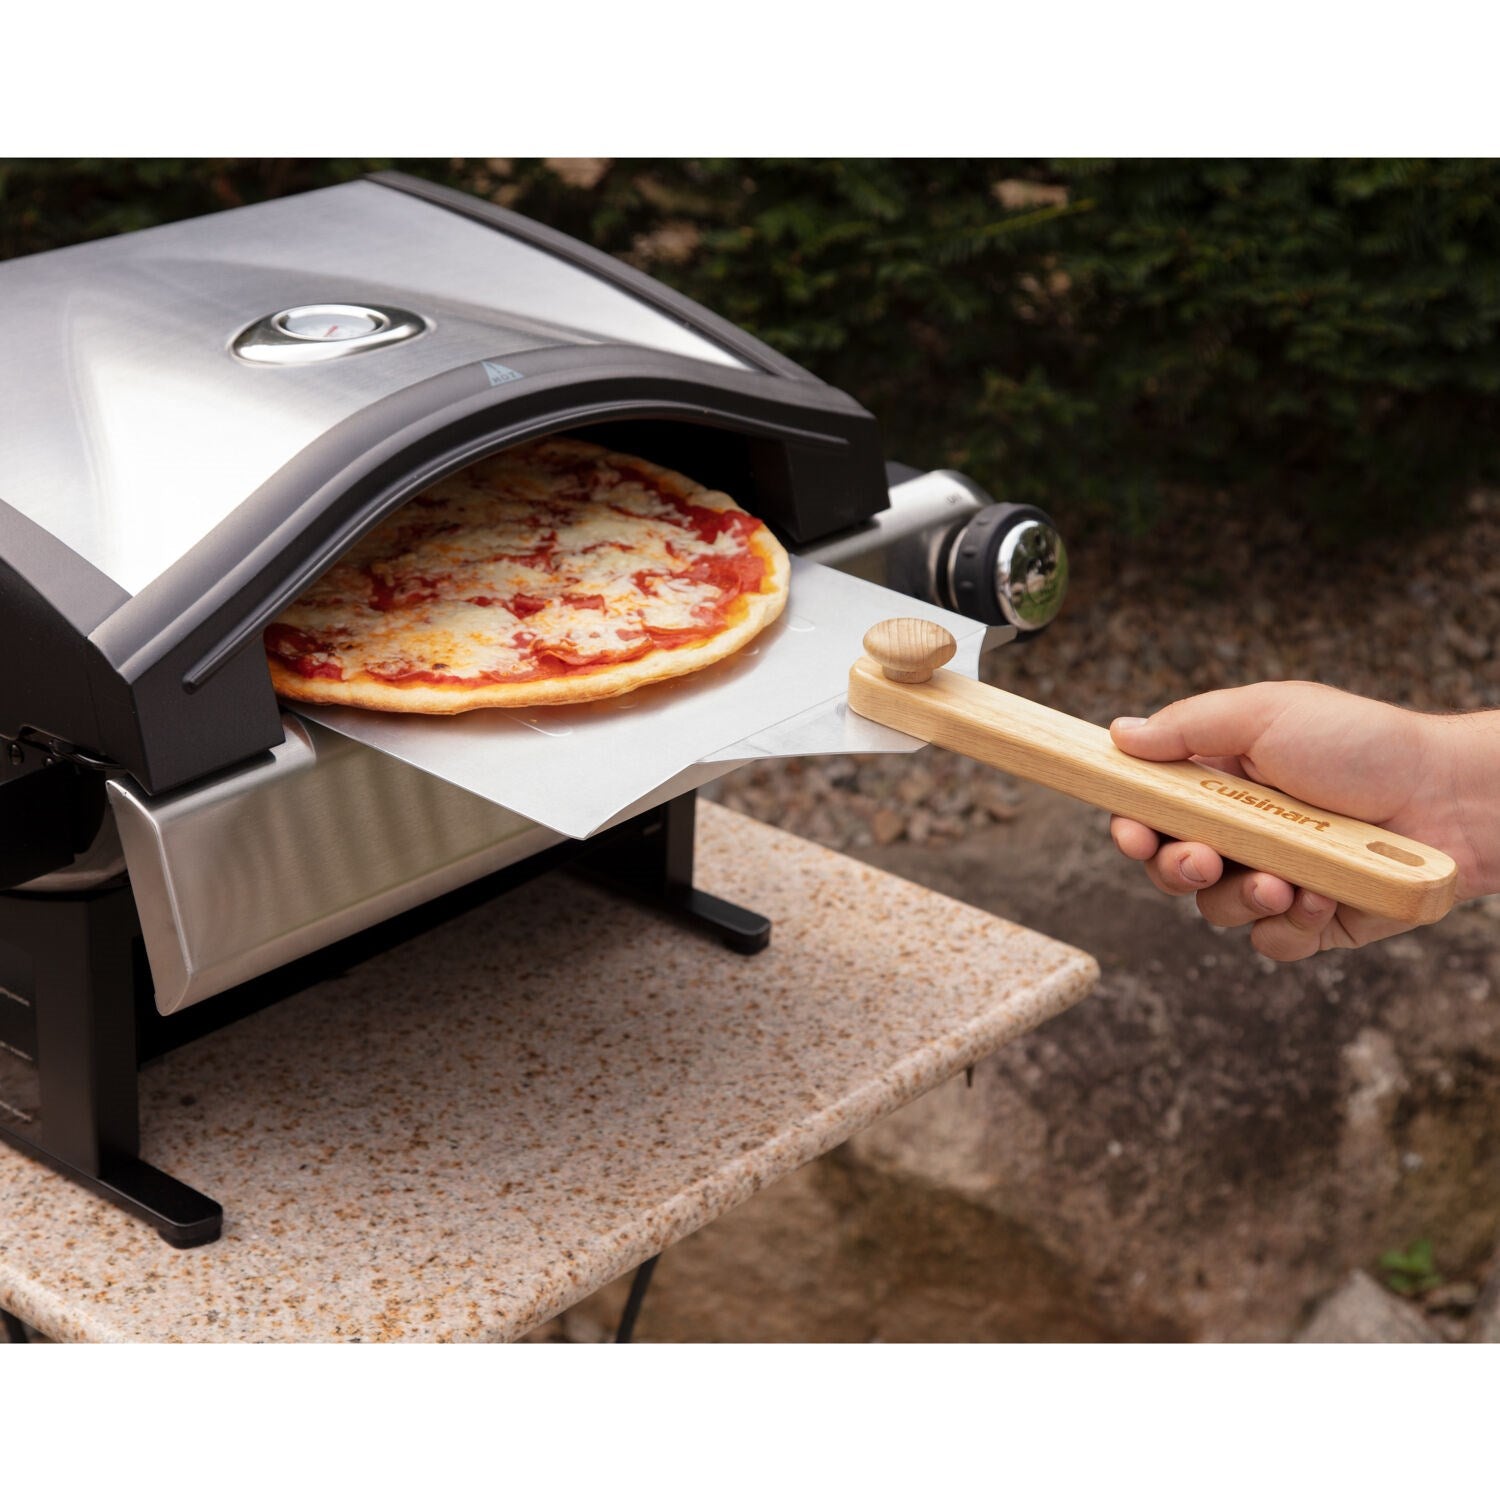 Cuisinart Grill - 12" Pizza Peel with Folding Wooden Handle - CPP-612